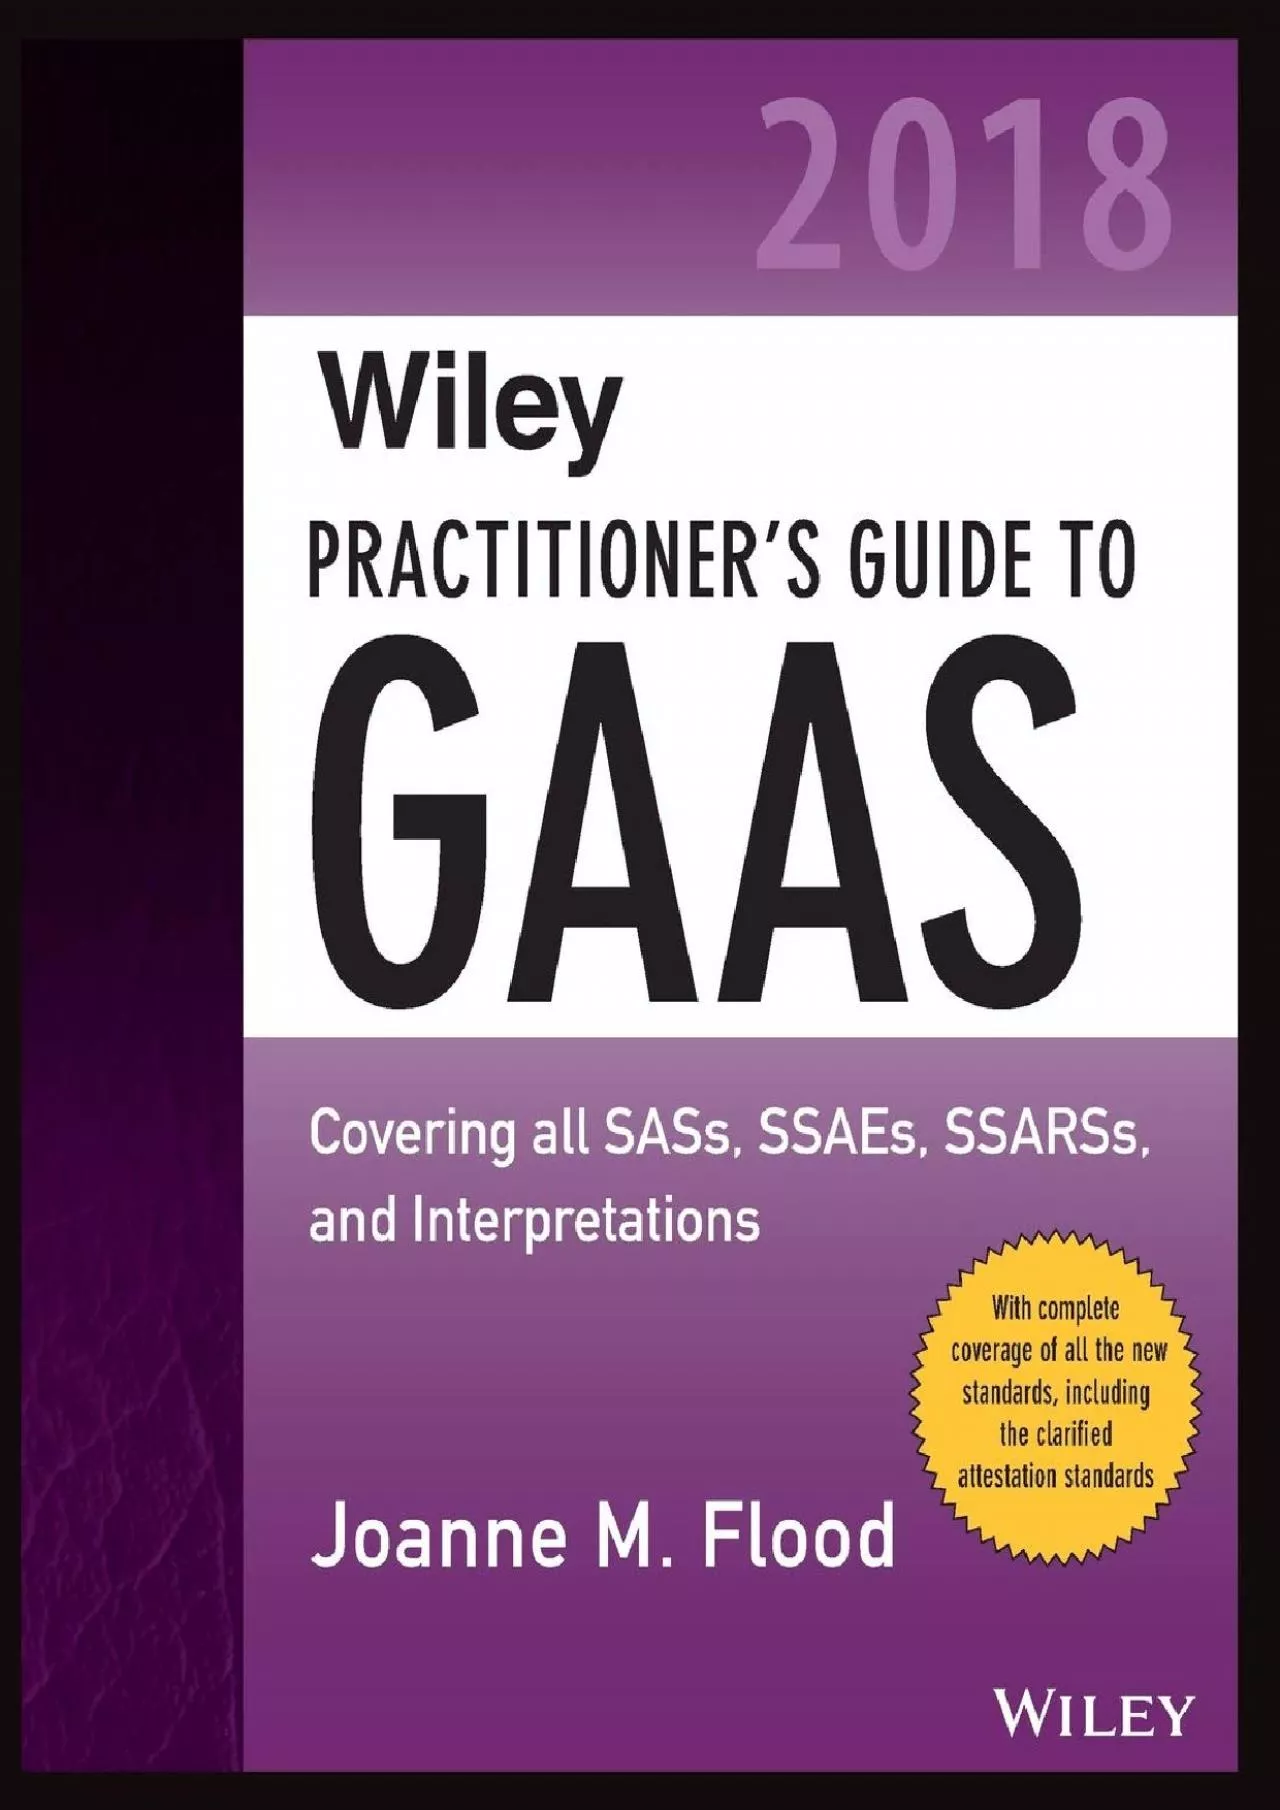 (BOOS)-Wiley Practitioner\'s Guide to GAAS 2018: Covering all SASs, SSAEs, SSARSs, PCAOB